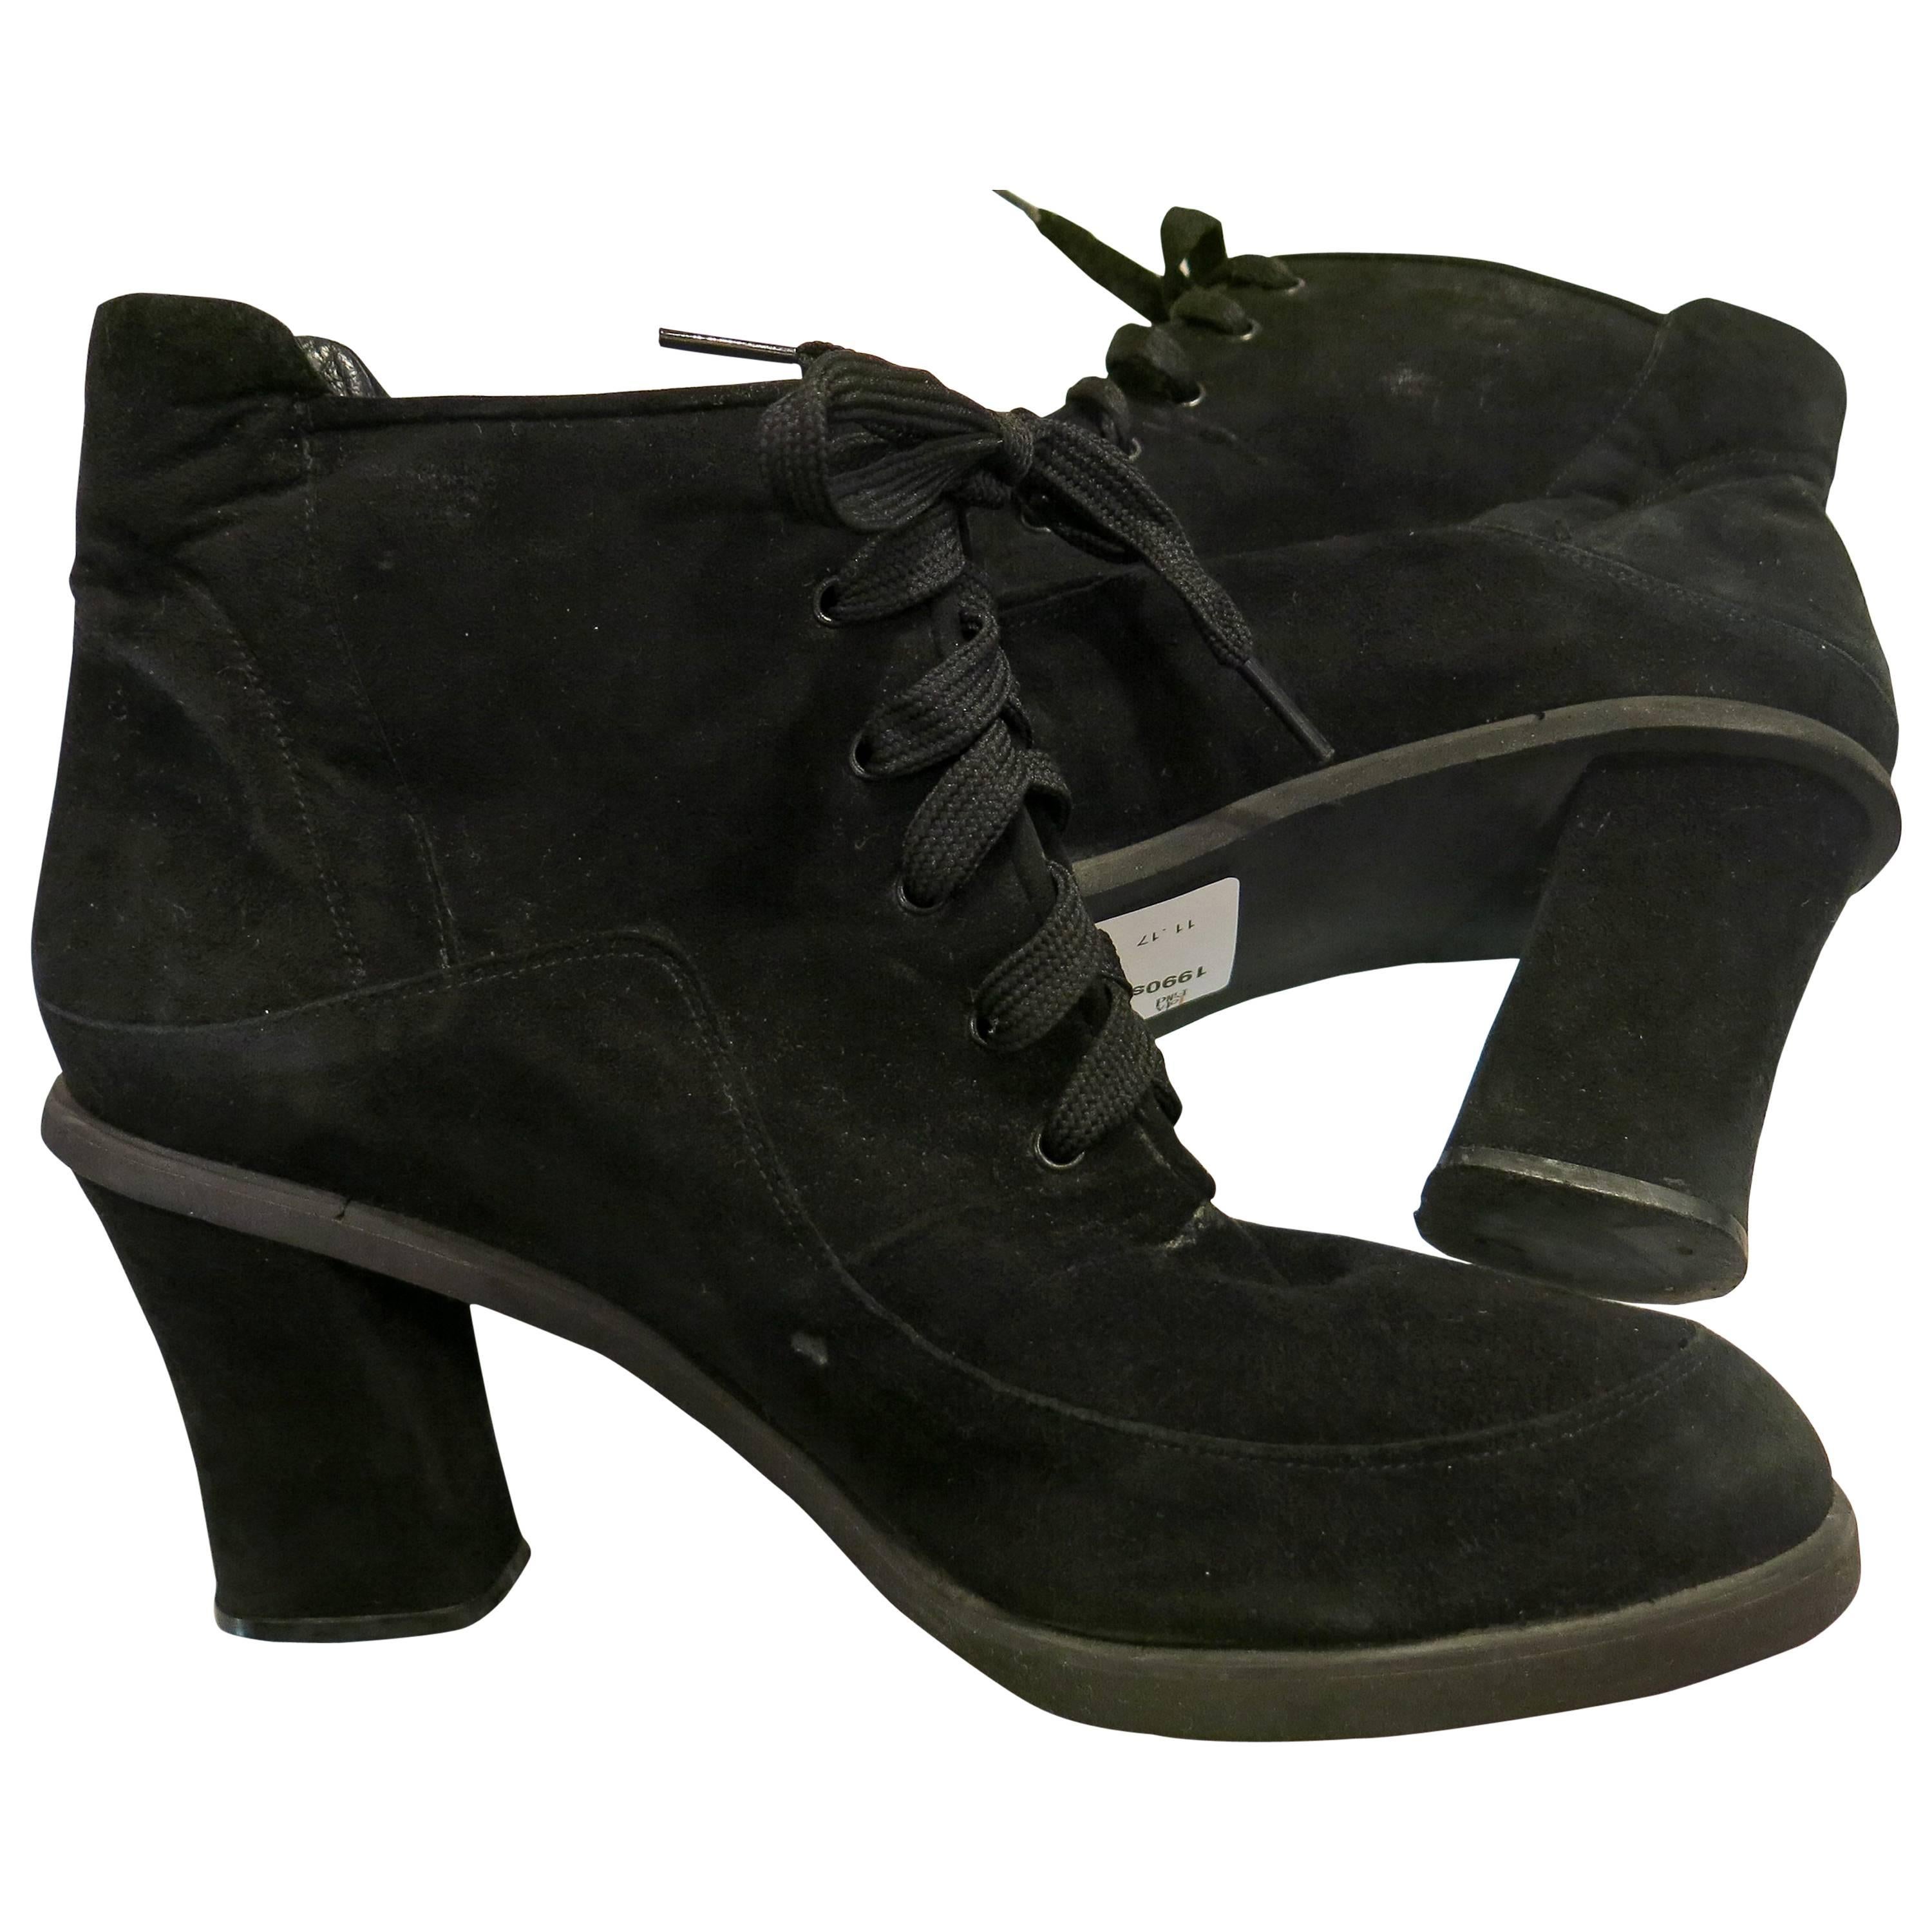 DKNY 1990s Black Suede Lace Up Heeled Boots Size 8 For Sale